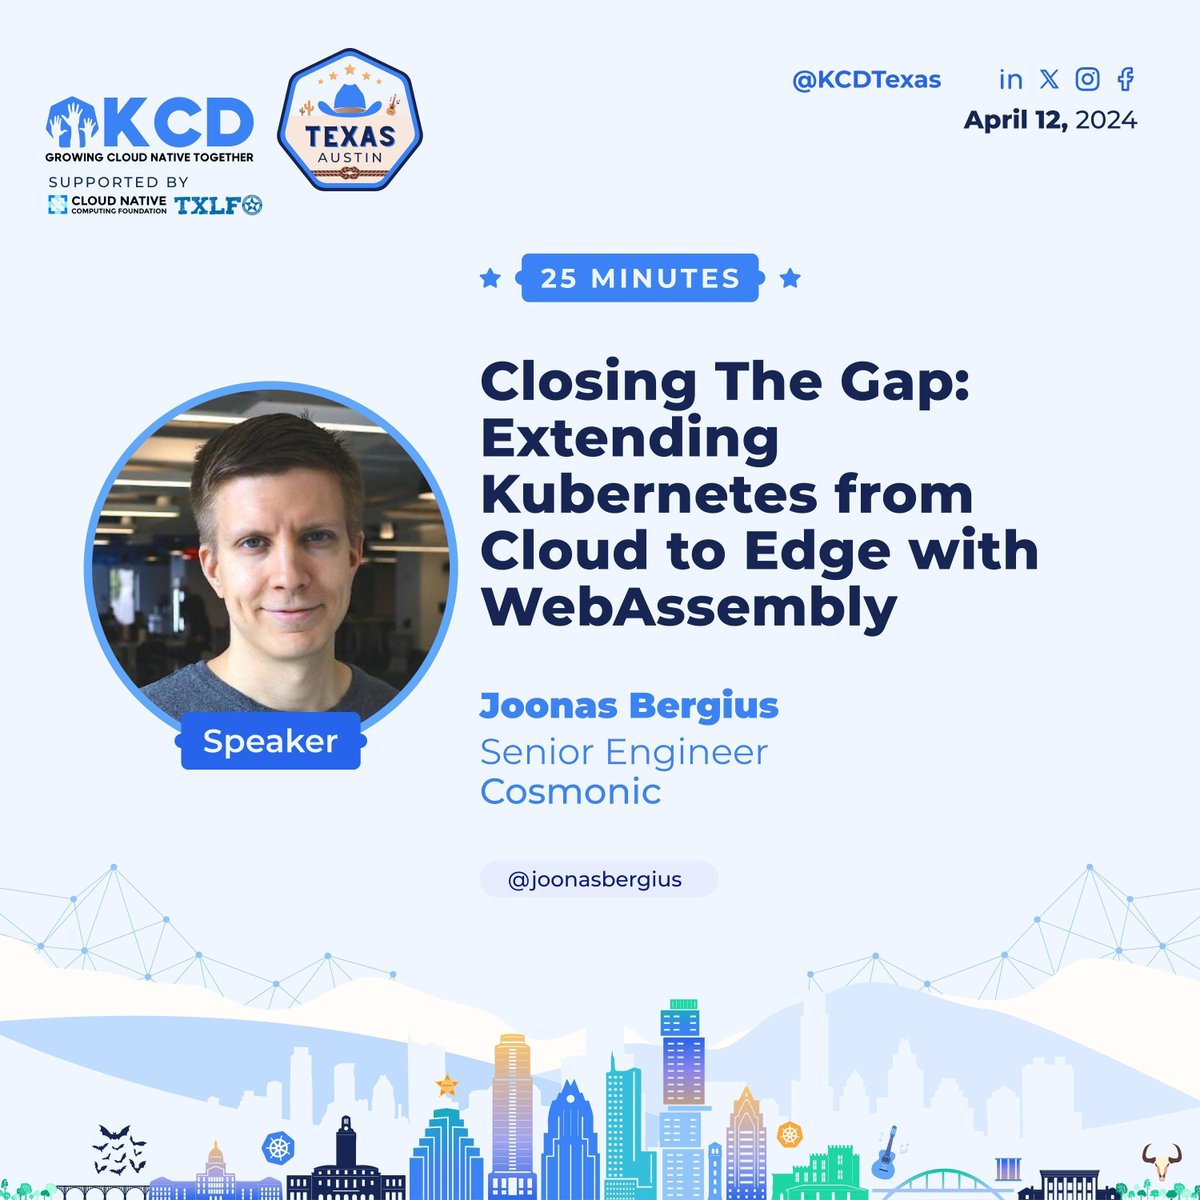 From Cloud to Edge with #Wasm! 🌐 Join Joonas Bergius at #KCDTexas for a groundbreaking session on #Kubernetes as a target for #WebAssembly workloads. 🚀 See how Wasm is shaping the future of cloud-native applications 🔗 texaskcd.com #KCD #CNCF #TXLF #ATX